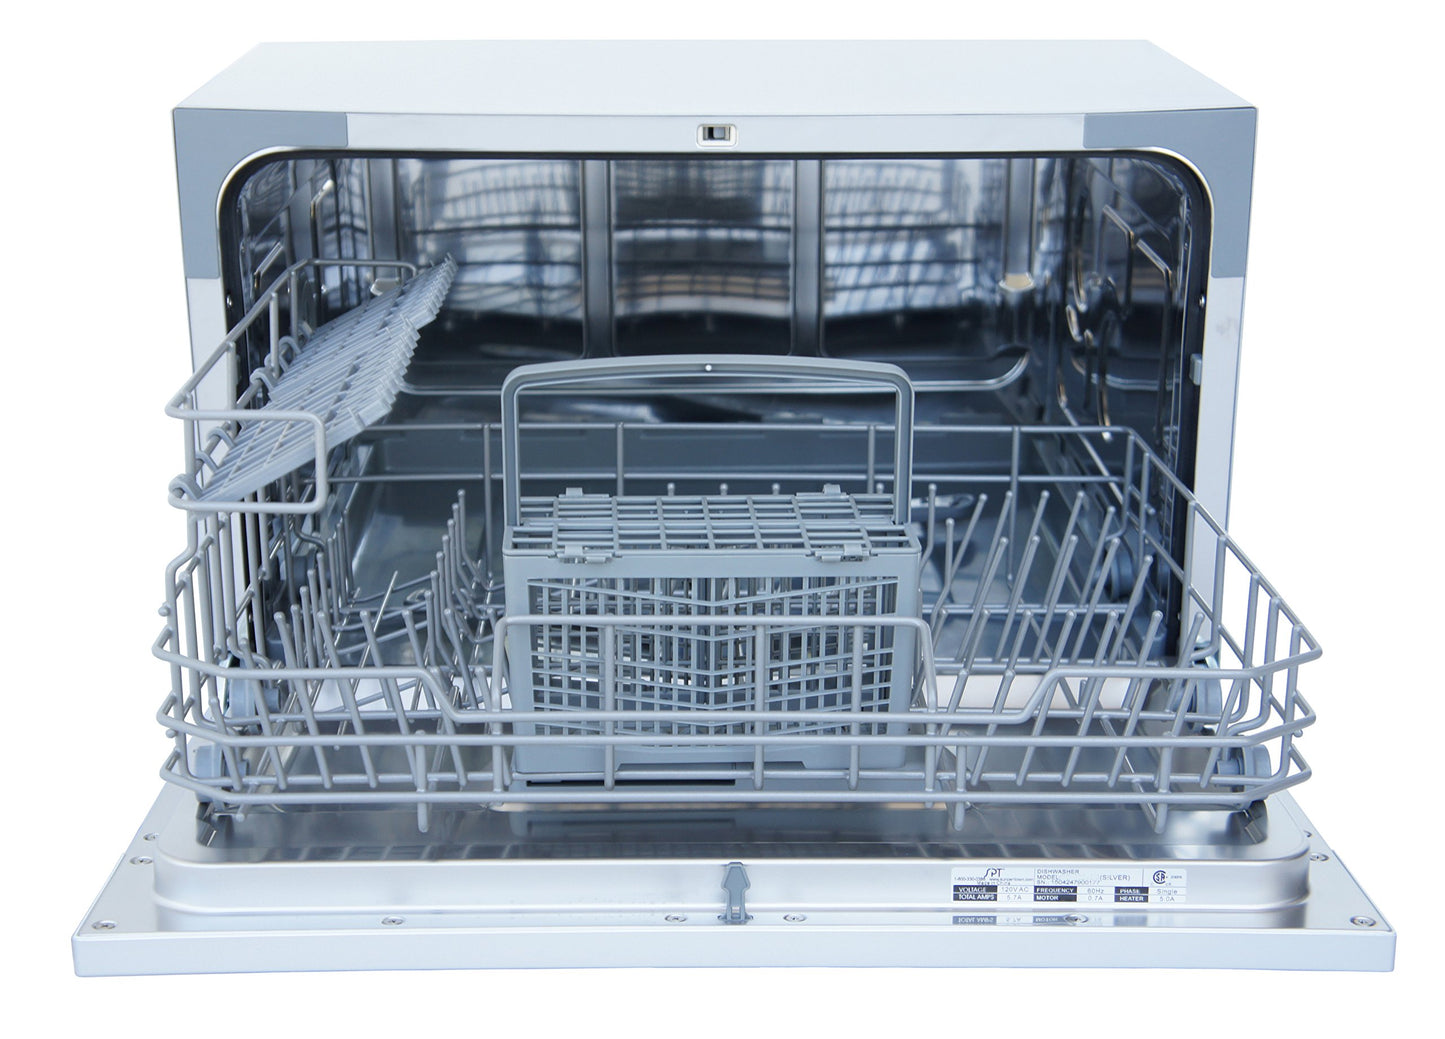 SPT SD-2224DS ENERGY STAR Compact Countertop Dishwasher with Delay Start - Portable Dishwasher with Stainless Steel Interior and 6 Place Settings Rack Silverware Basket, Silver